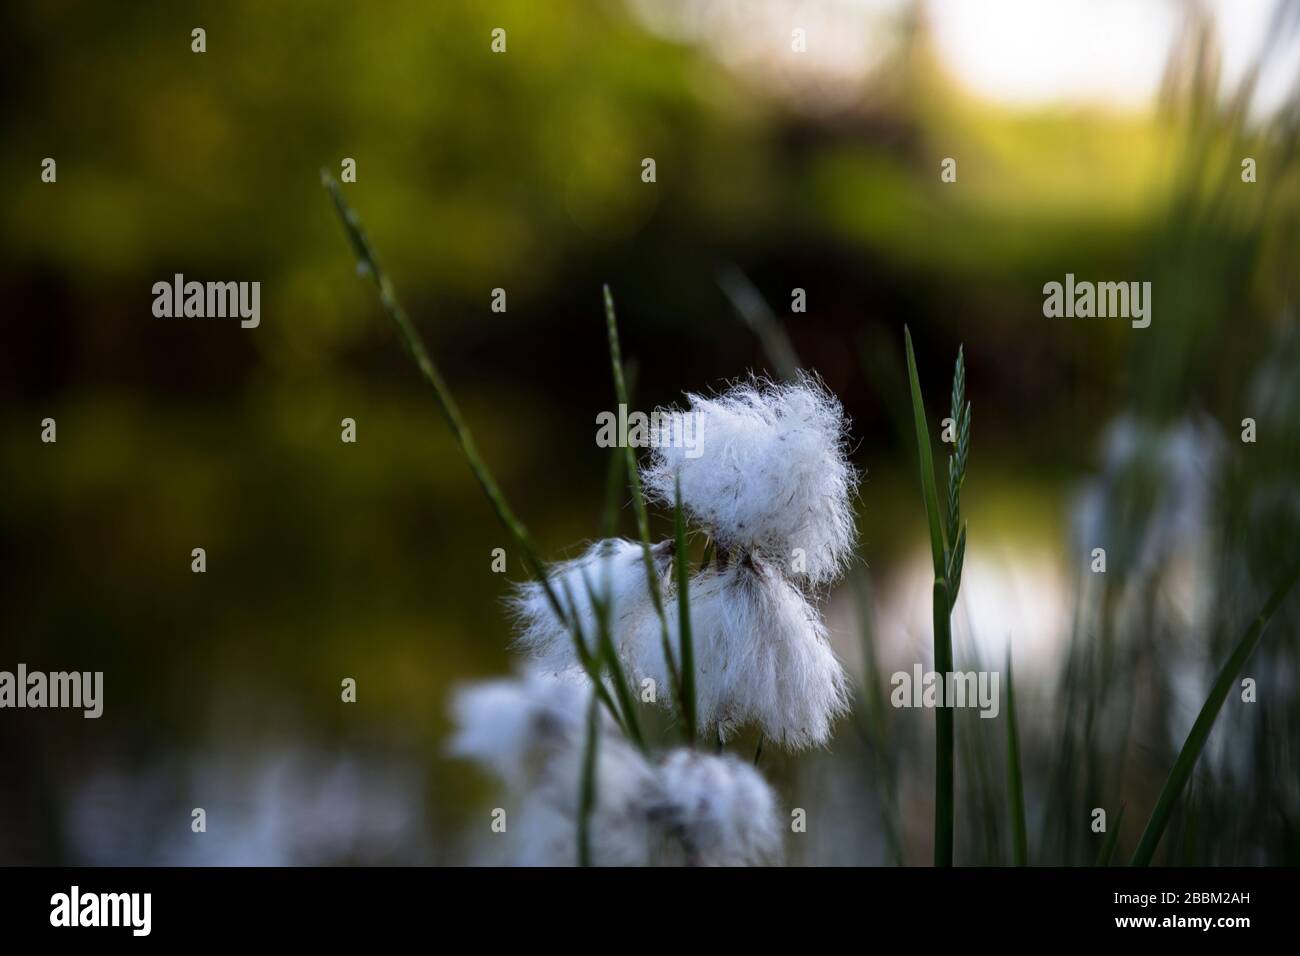 Grass blooming near water pond, white blossom, fluffy light in evening light, surrounded by green grass. Stock Photo